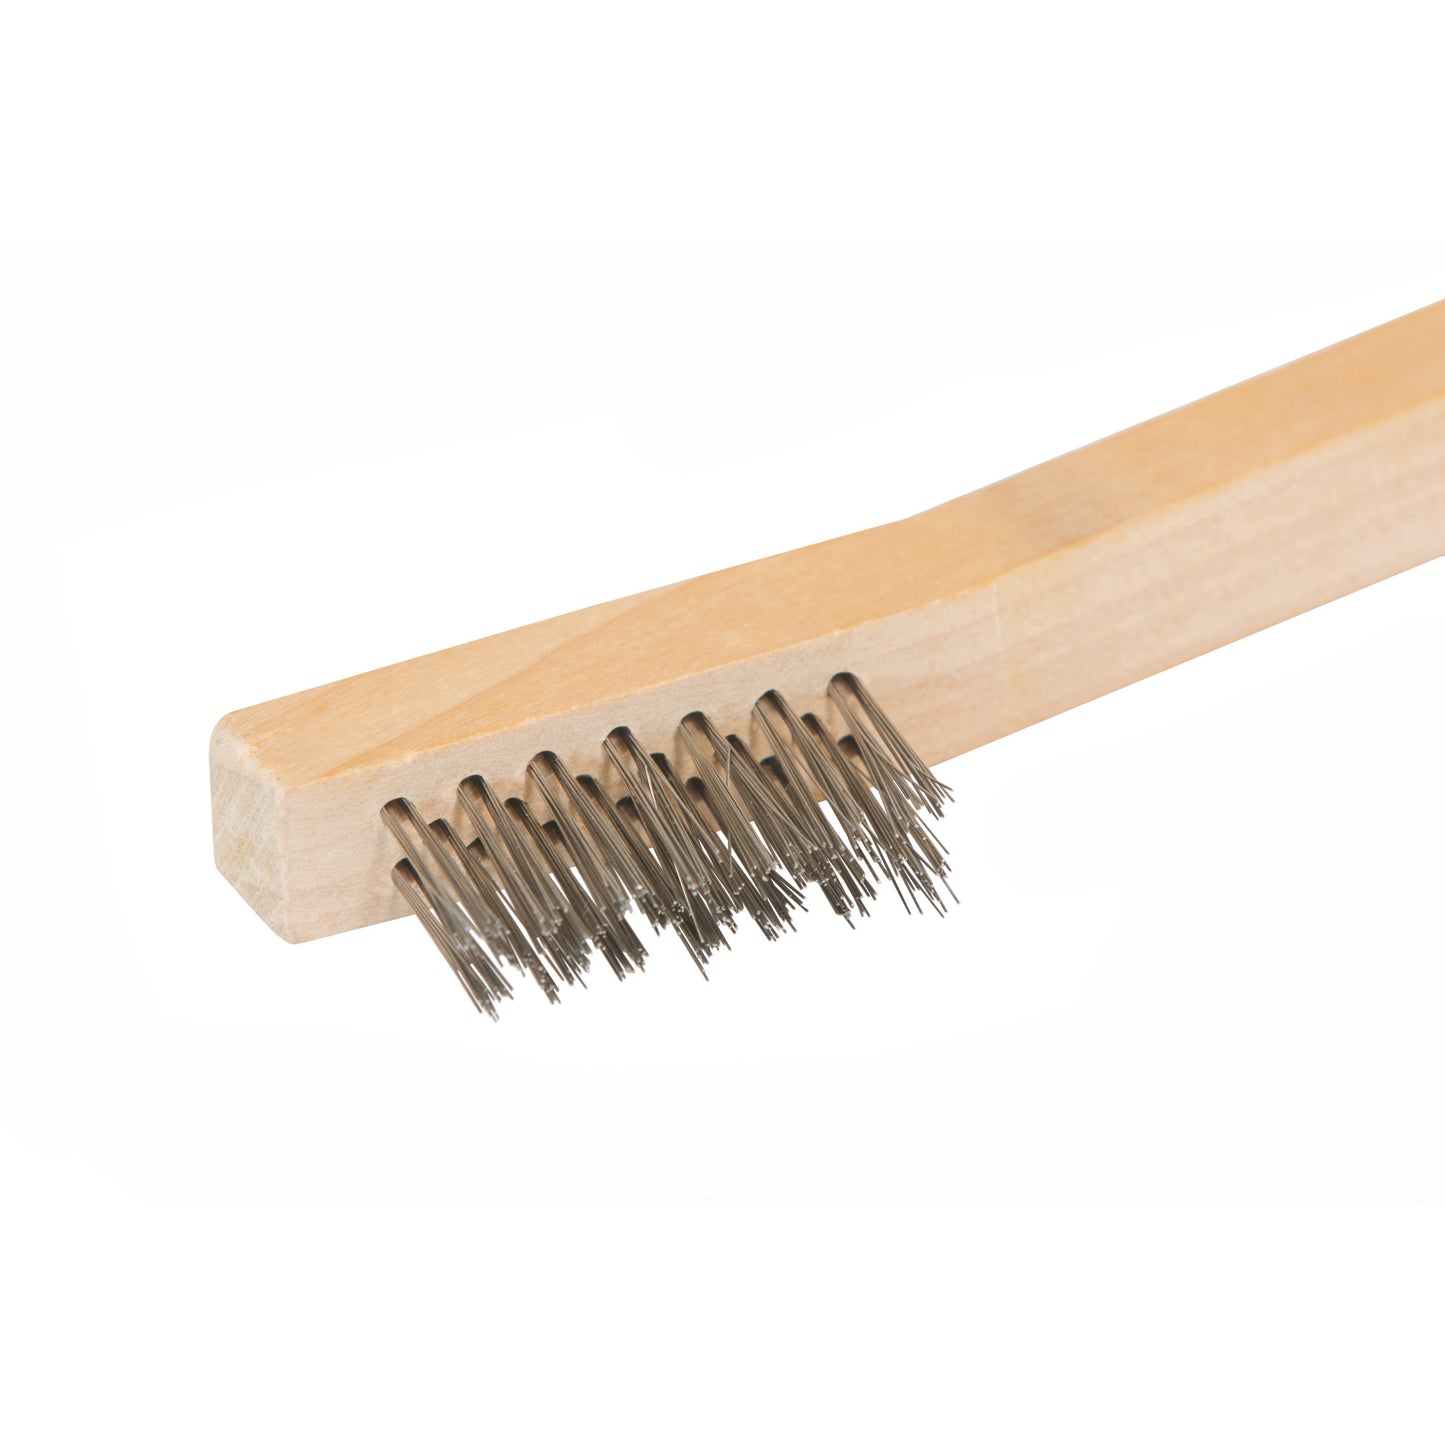 Stainless Steel 800-Bristle Count Wire Brush with Wood Handle, 5-Pack